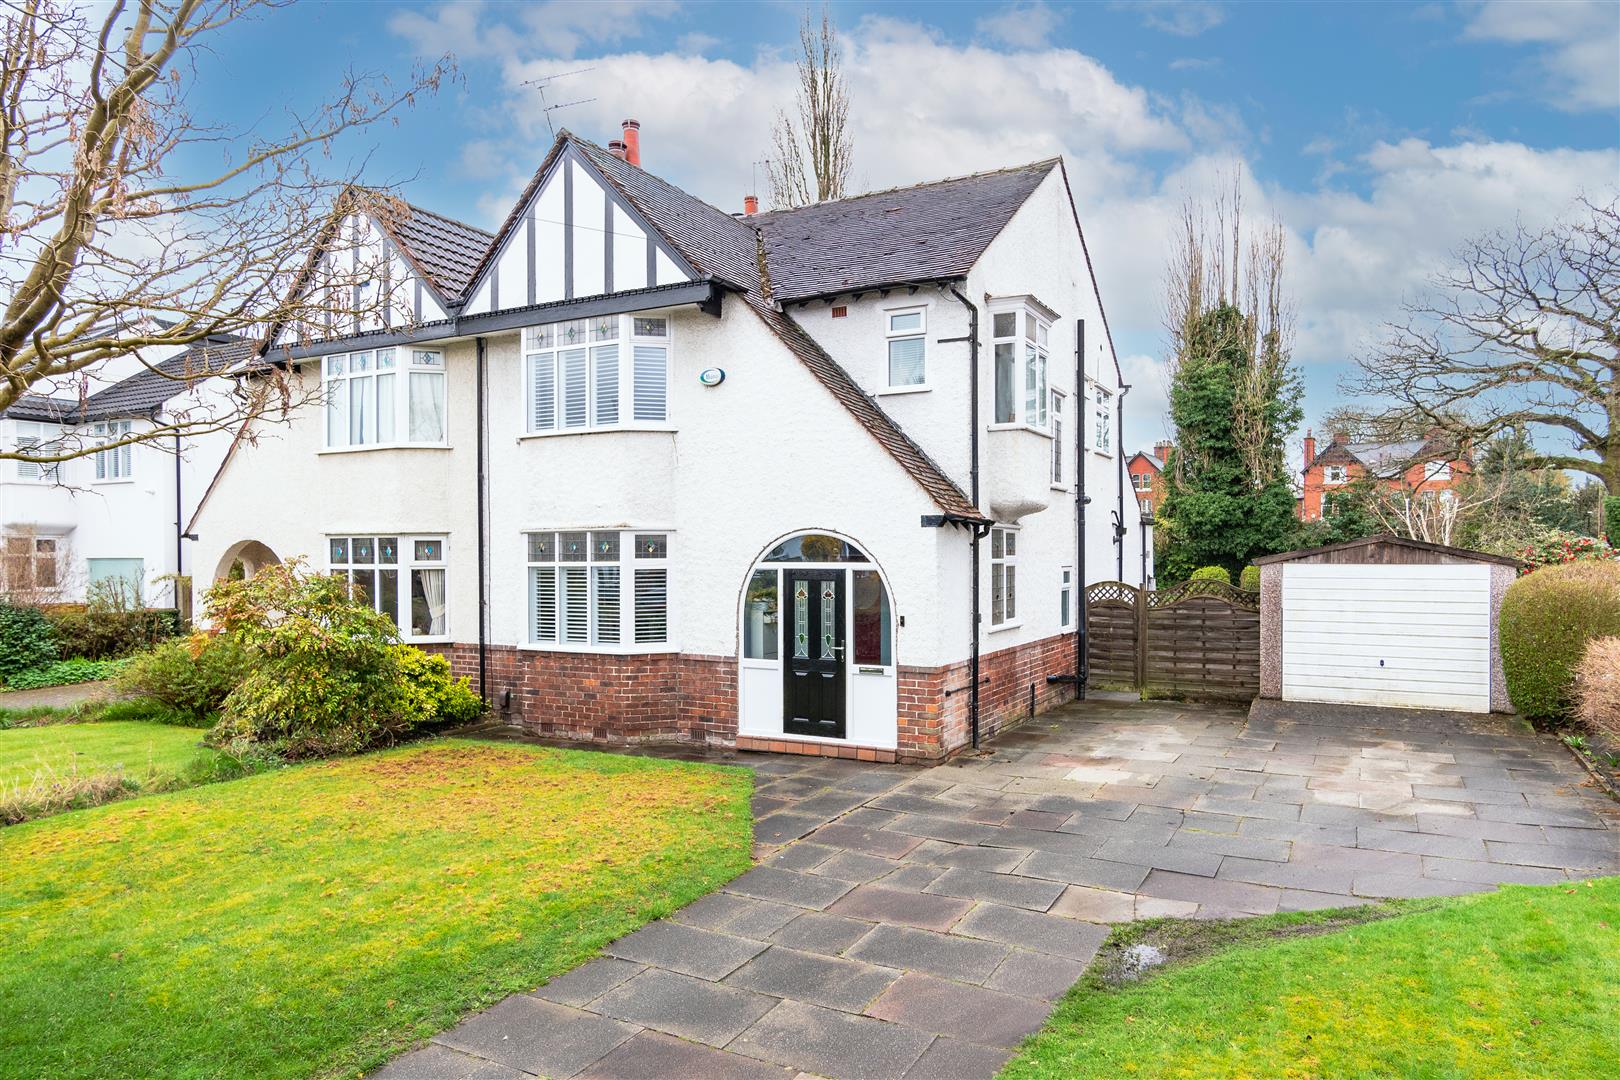 3 bed semi-detached house for sale in Mossgrove Road, Altrincham  - Property Image 1